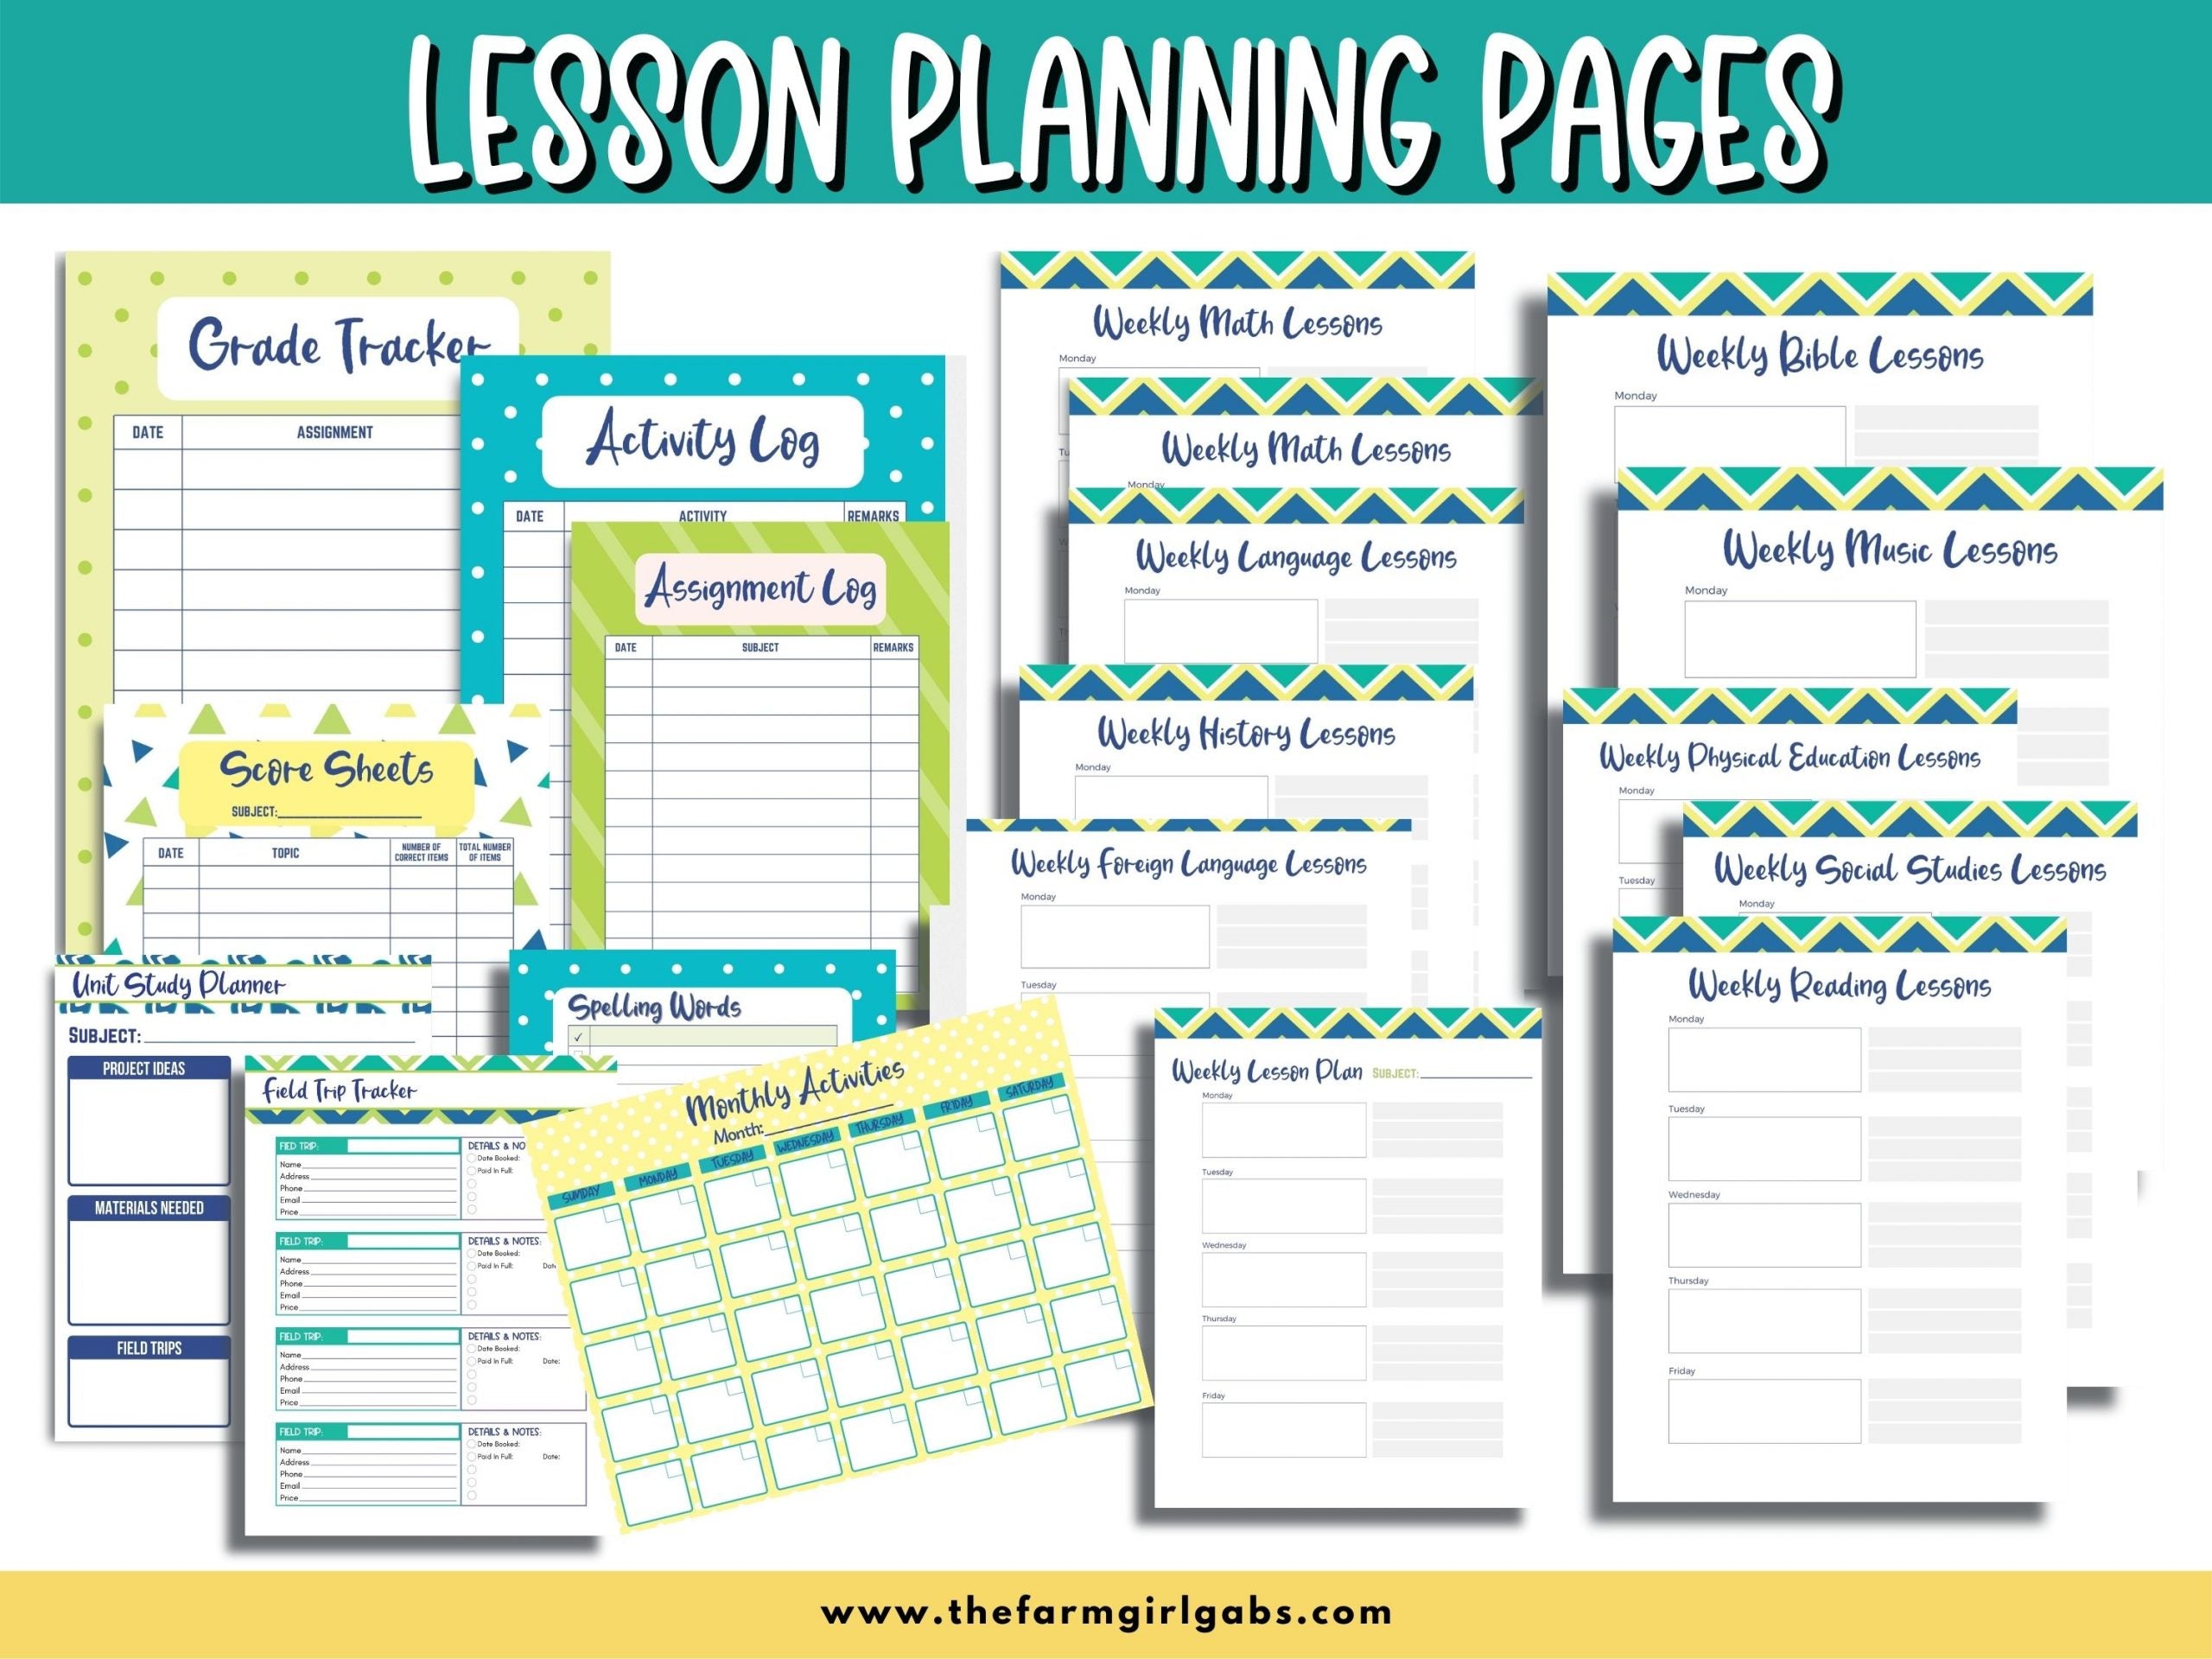 Start your homeschool year ready and organized. This 75-page printable homeschool planner has all the information you need to plan a successful school year for your kids. This Ultimate Homeschool Planner Bundle will help you plan your days, weeks and year and track your success. This printable student planner comes in four sizes. Plan out the entire school year with this easy to use school planner.